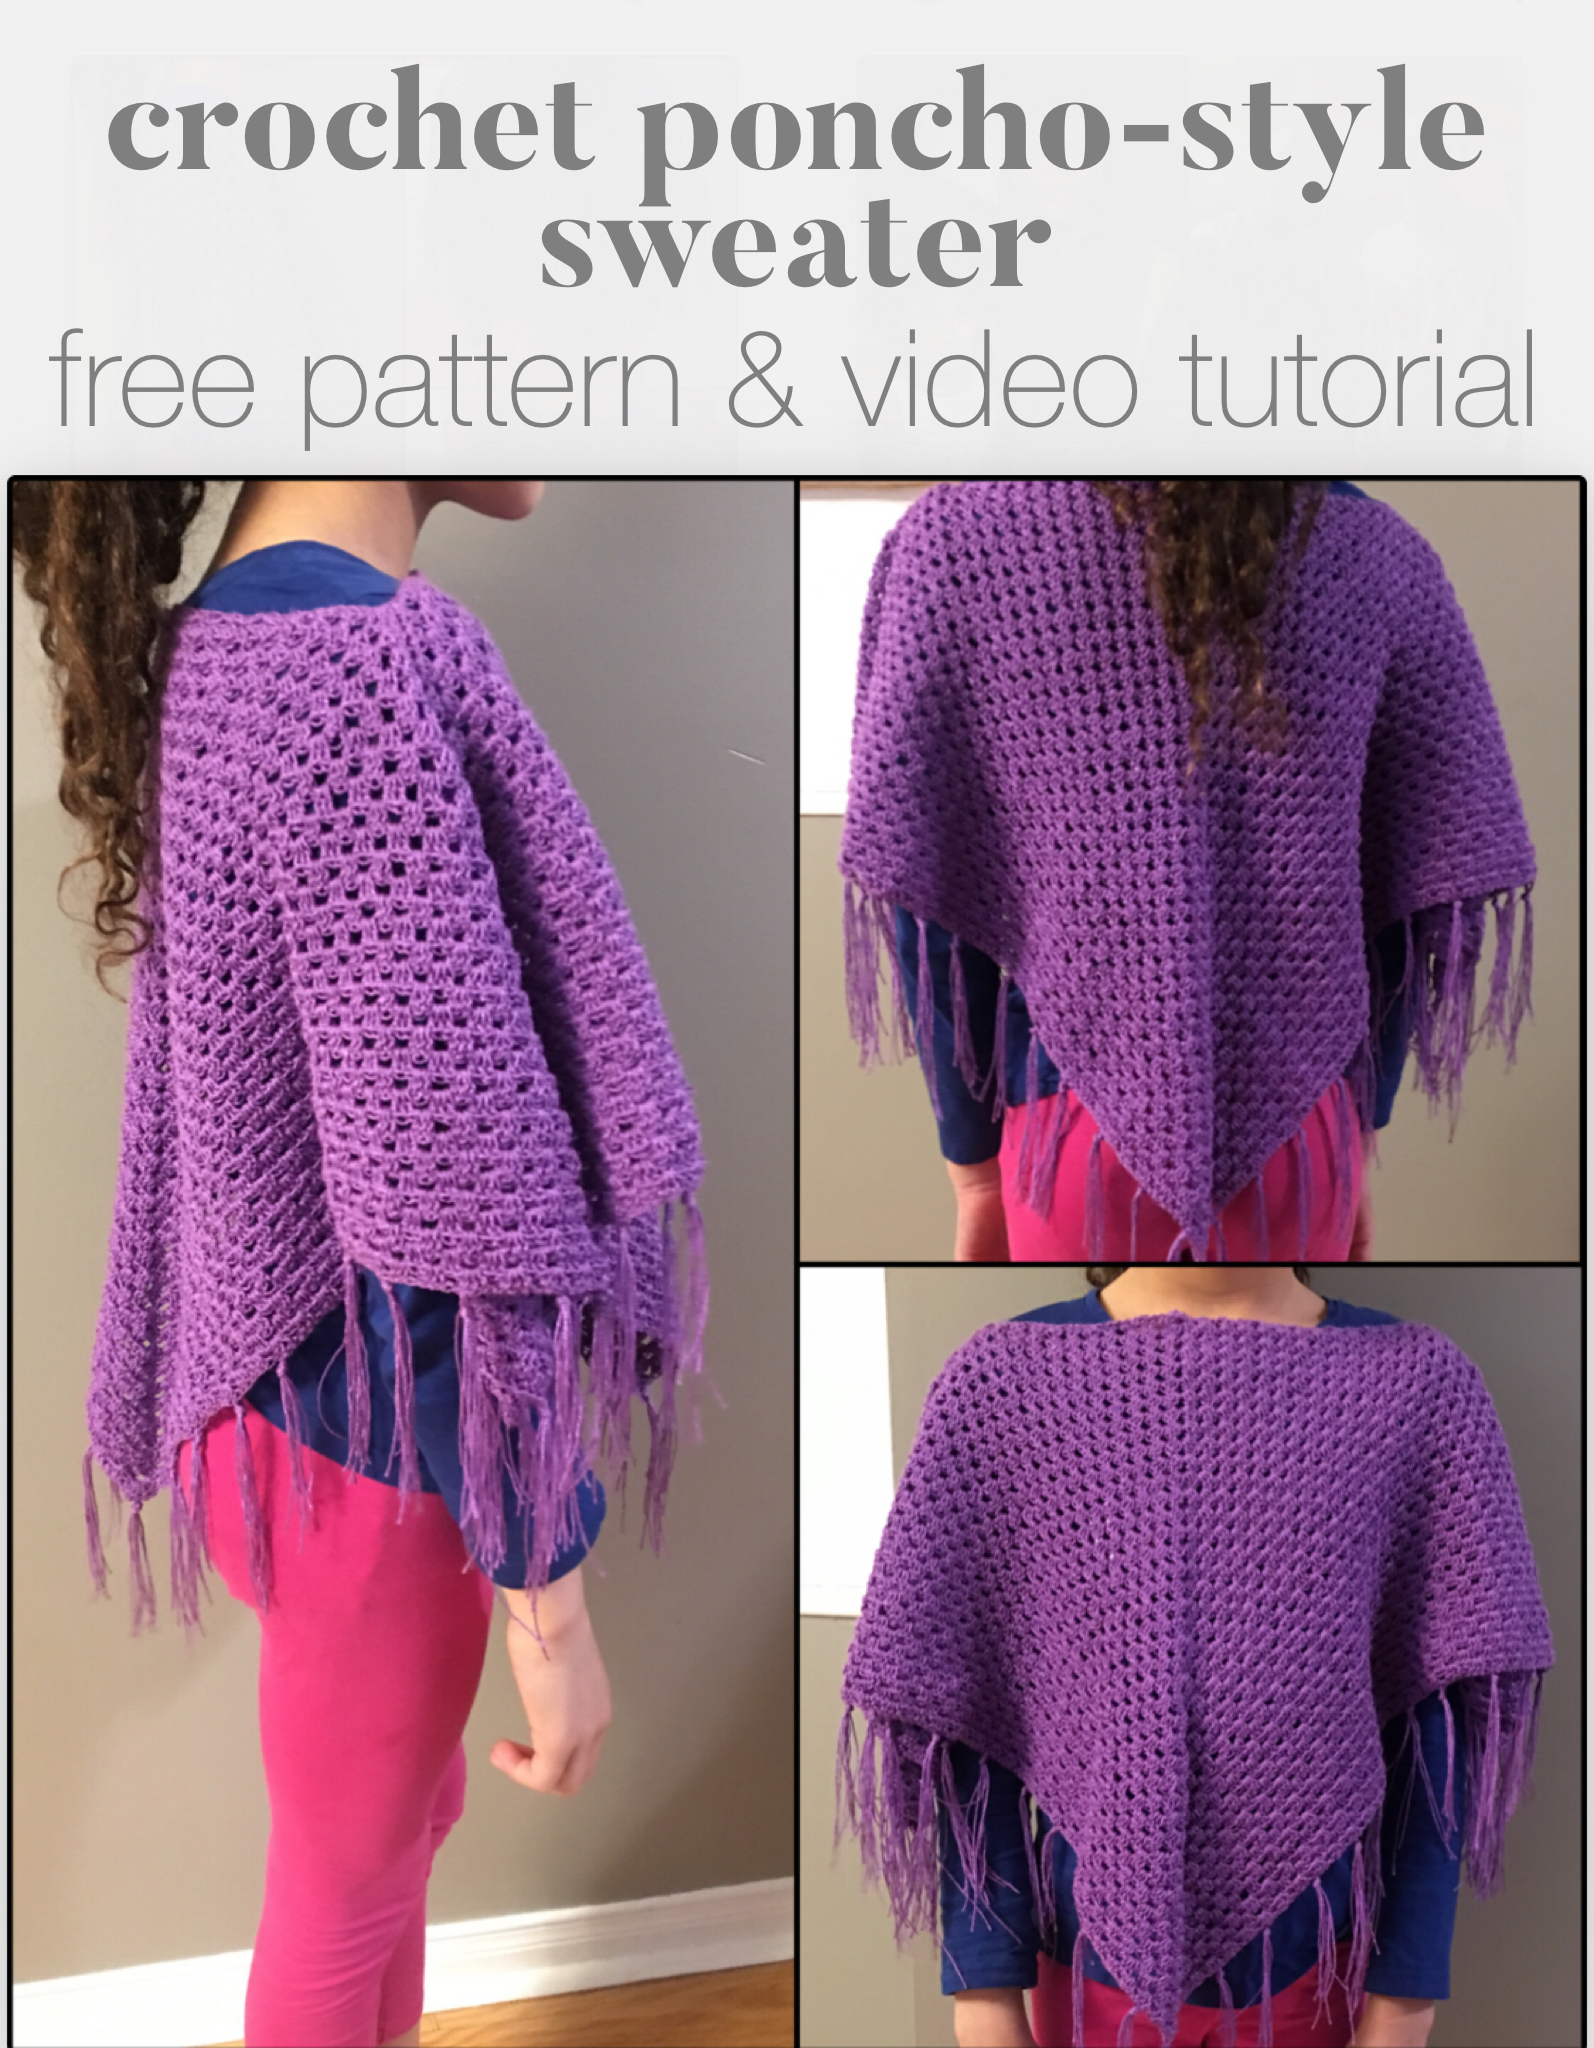 crochet pattern, poncho, crochet poncho, crochet poncho pattern, how to crochet a poncho, poncho style sweater, free crochet pattern and video tutorial